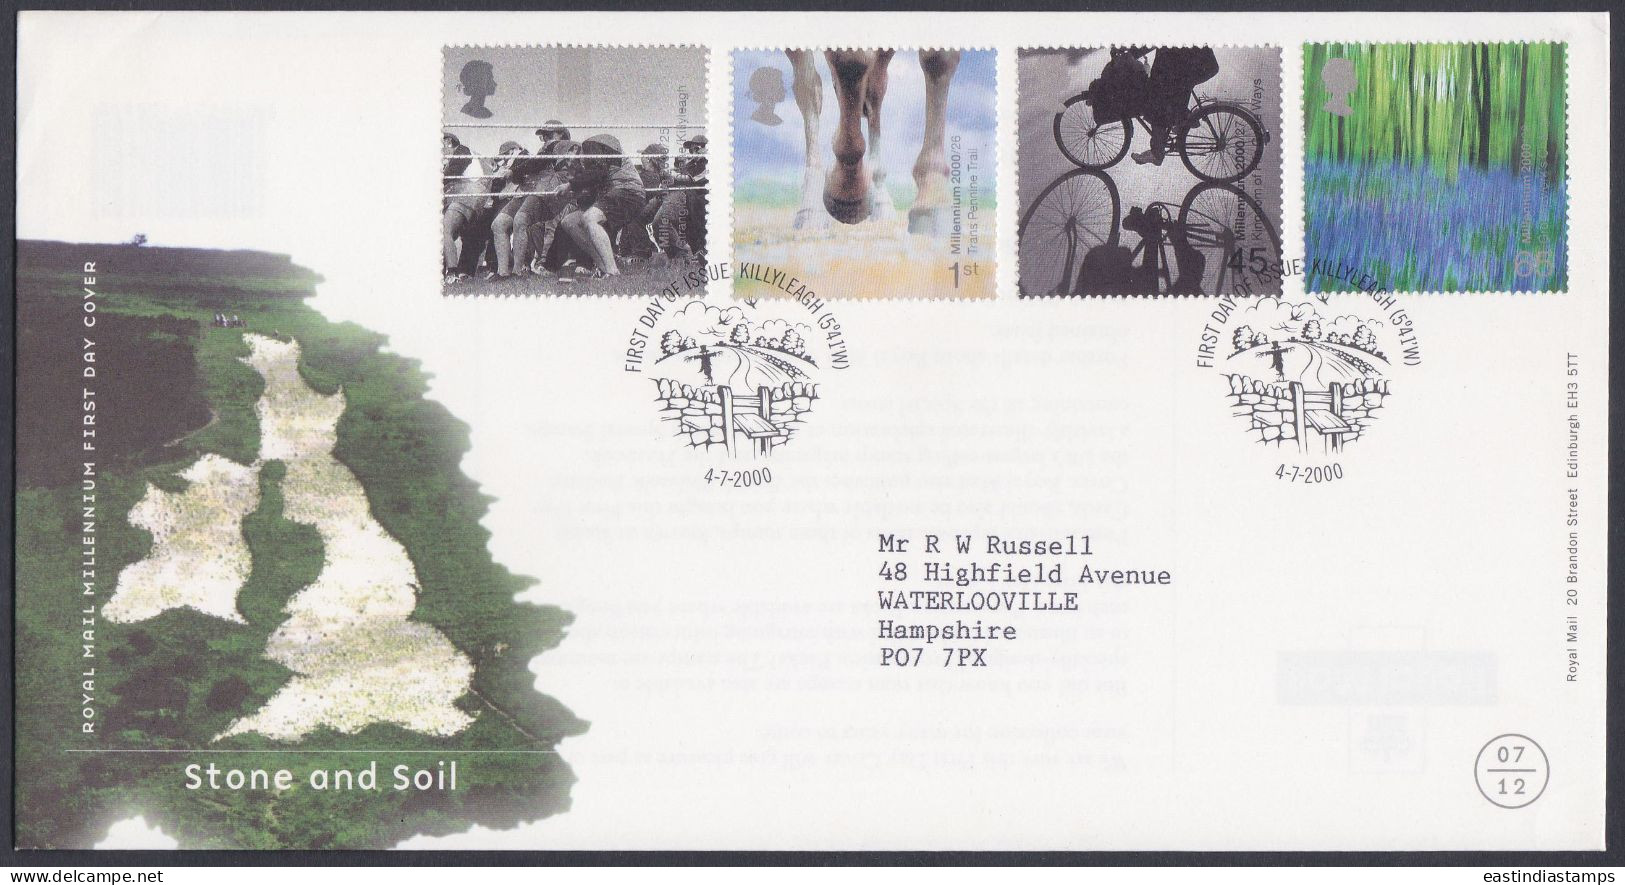 GB Great Britain 2000 FDC Stone And Soil, Sports, Horse, Cycle, Bicycle, Pictorial Postmark, First Day Cover - Covers & Documents